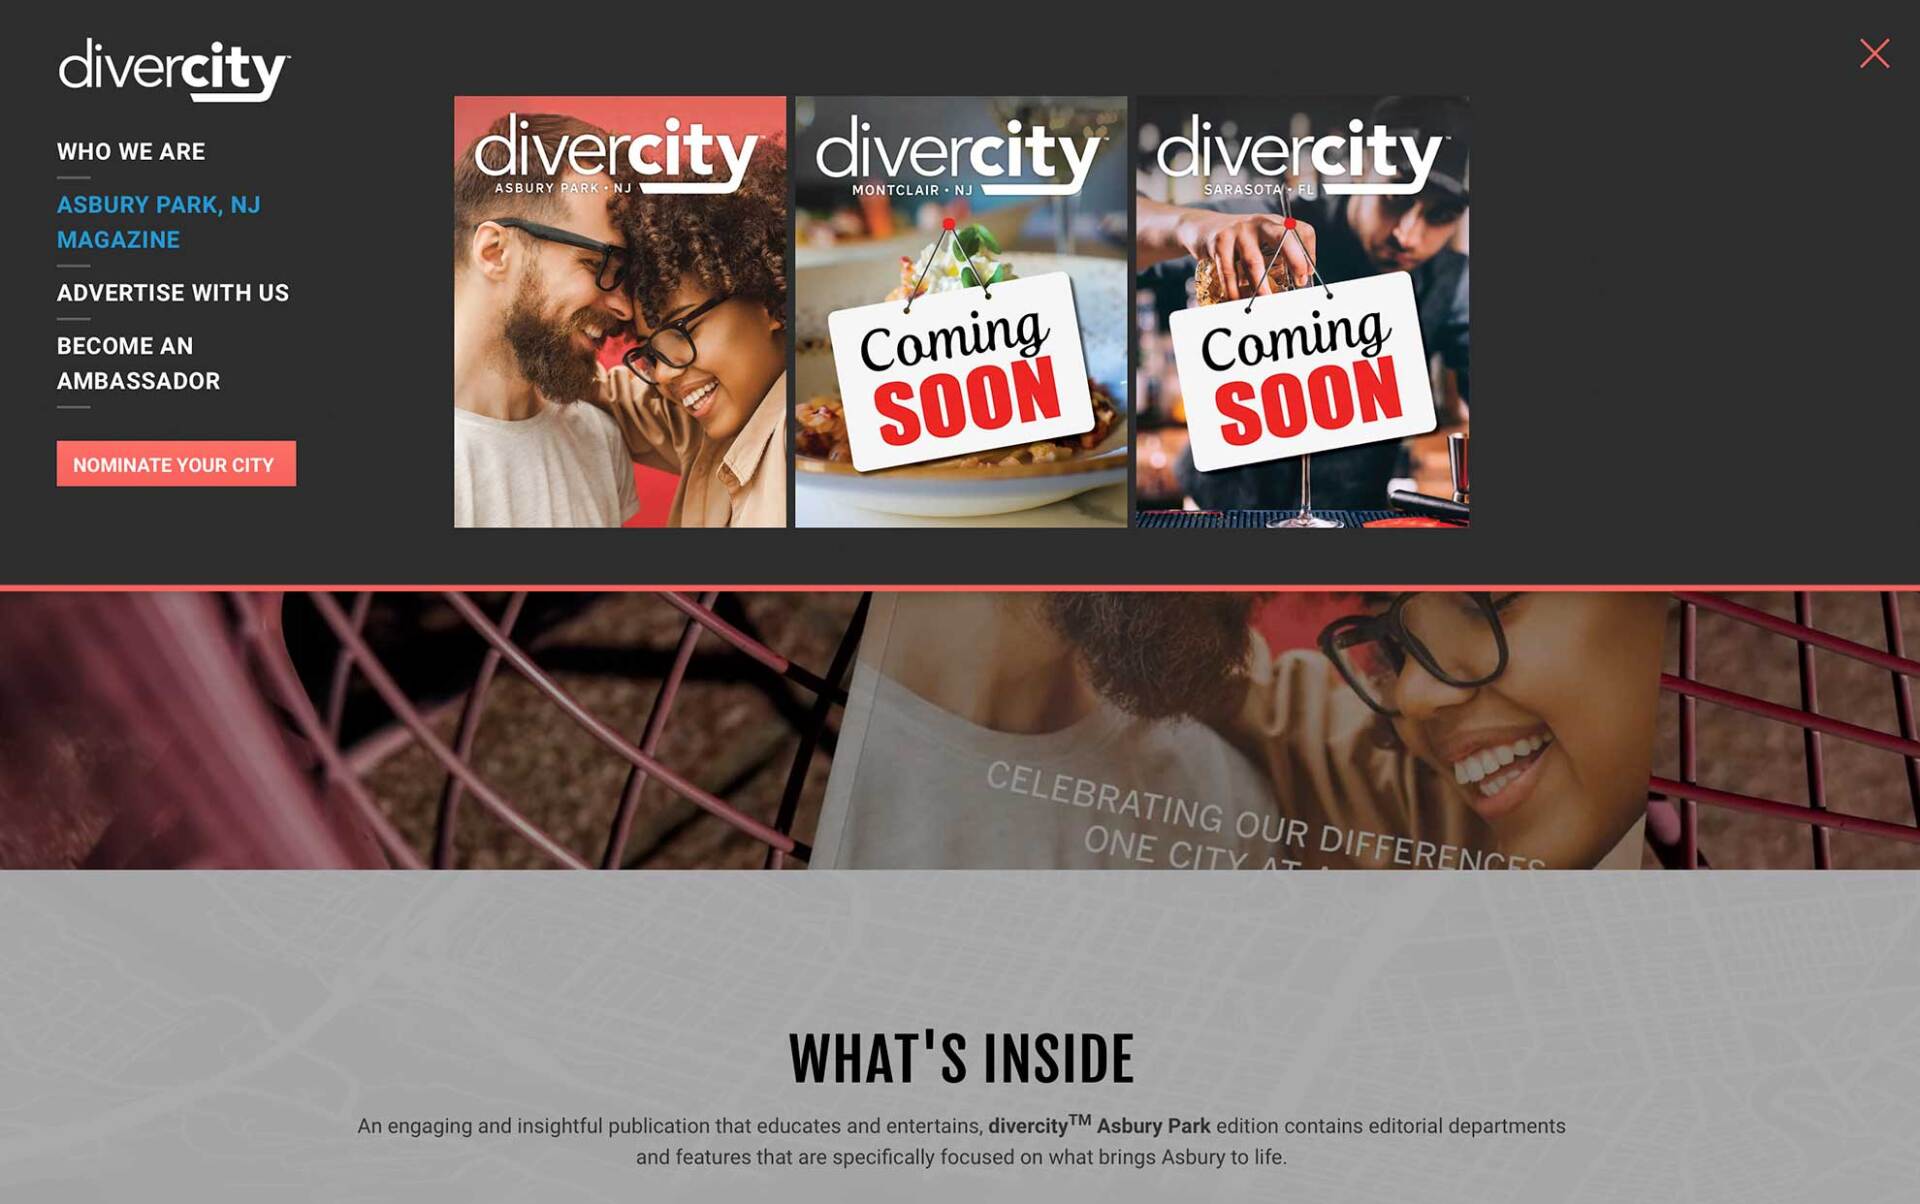 A website page with the brand divercity on the screen.